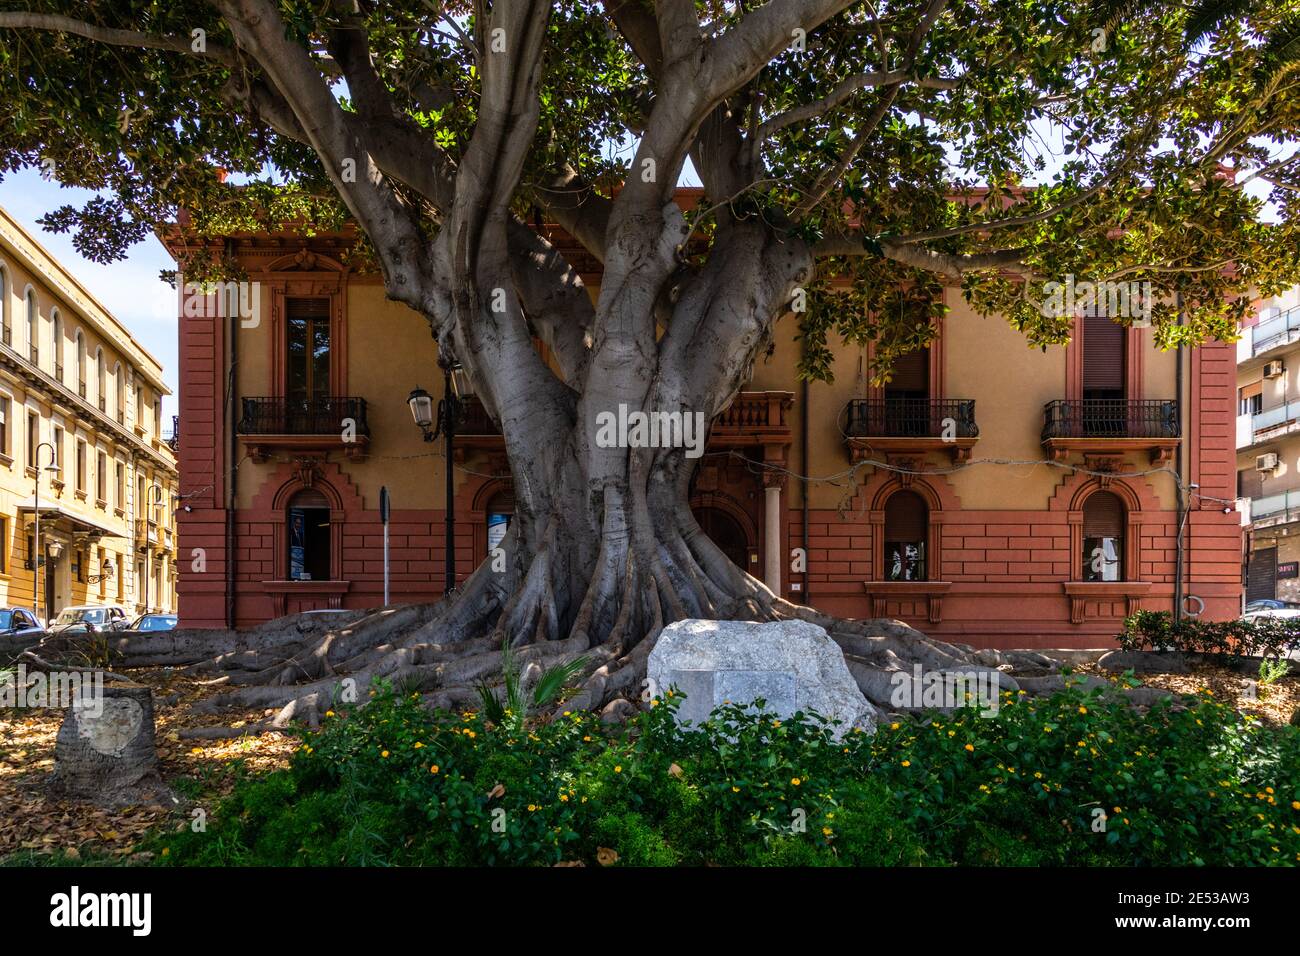 A secular tree in front of a liberty (Art Nouveau) style building on Lungomare Falcomatà, Reggio Calabria, Italy Stock Photo